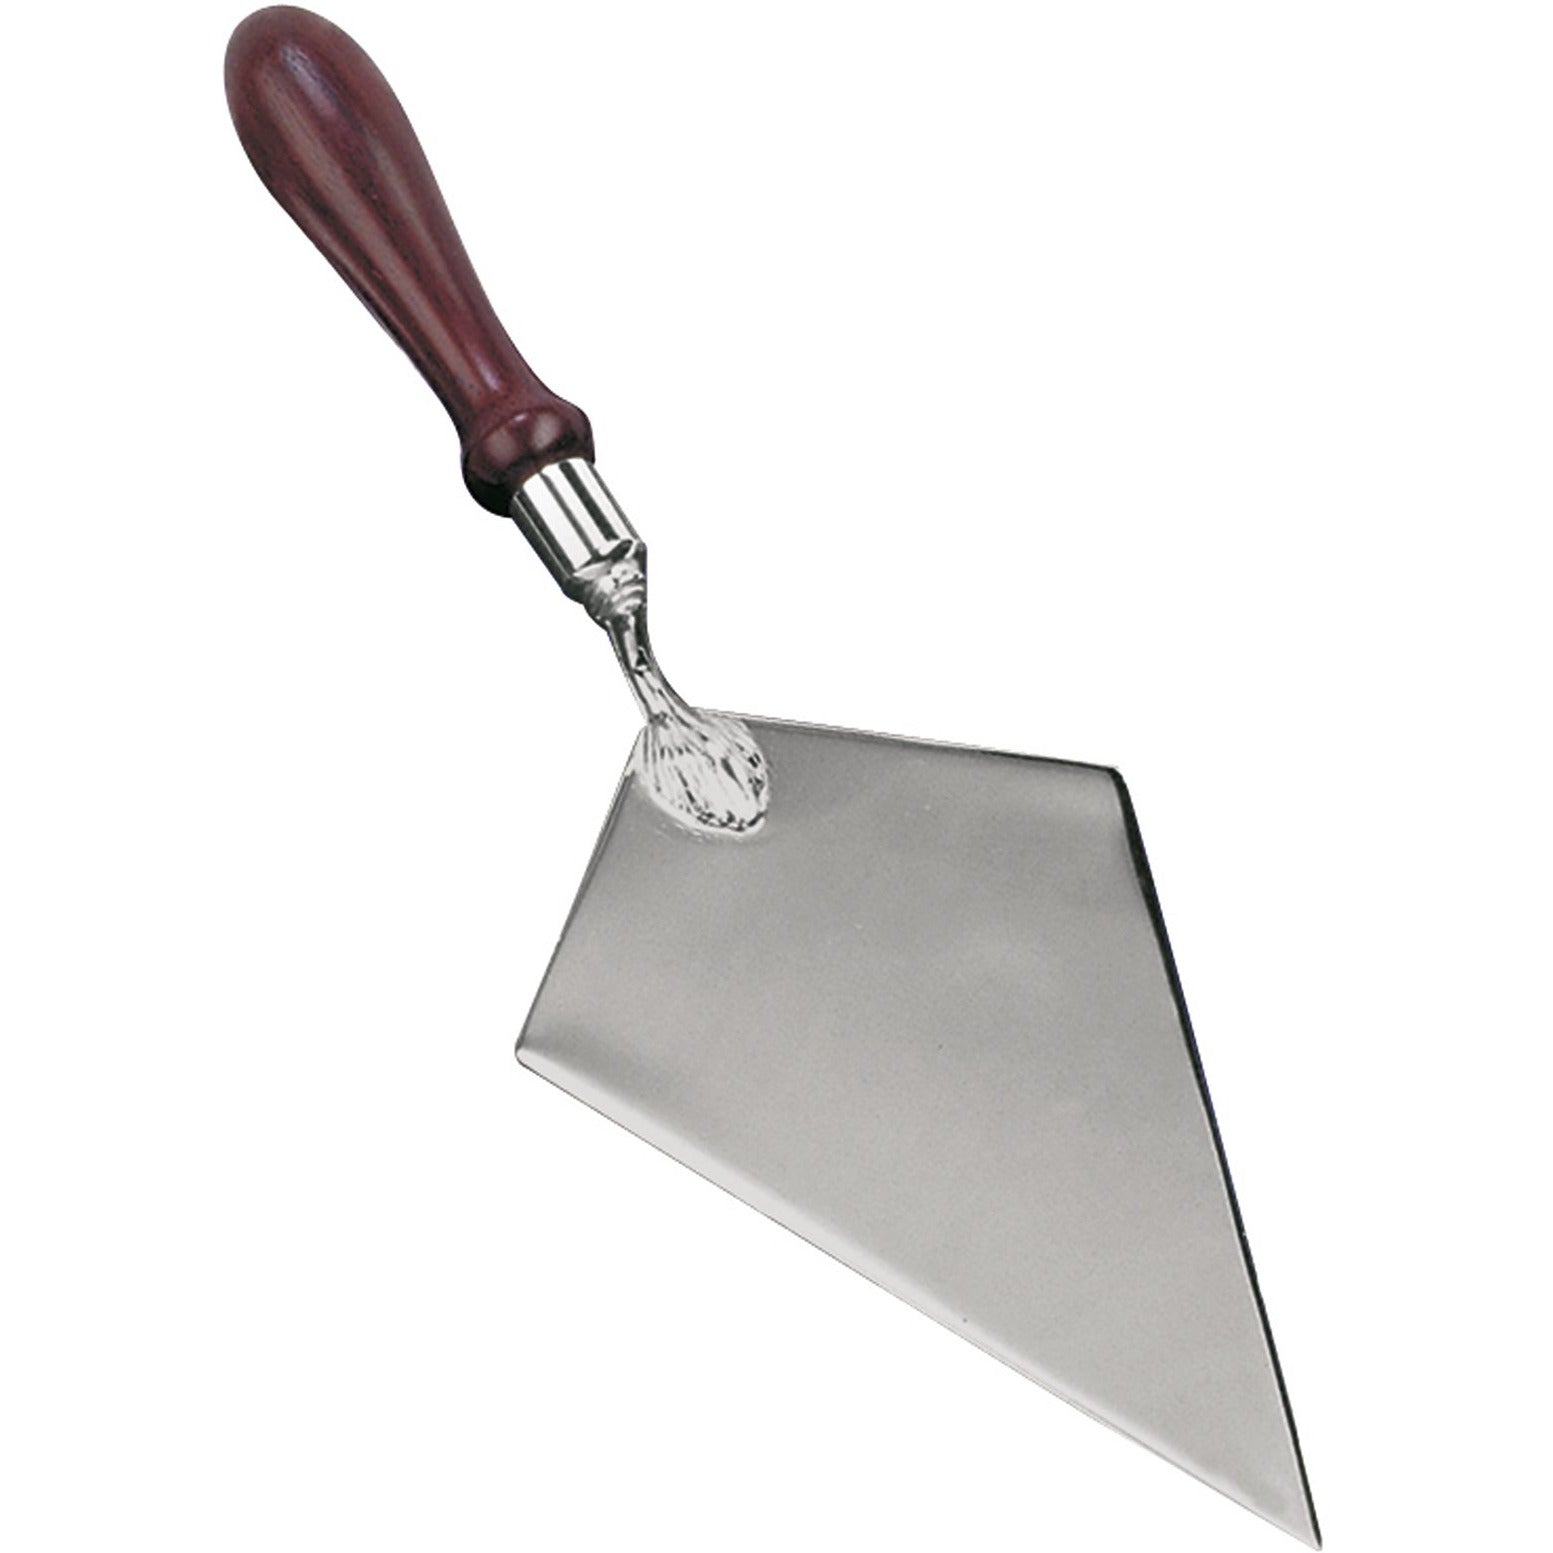 Nickel Plated Trowel (10.5in) with Rosewood Handle - No Box